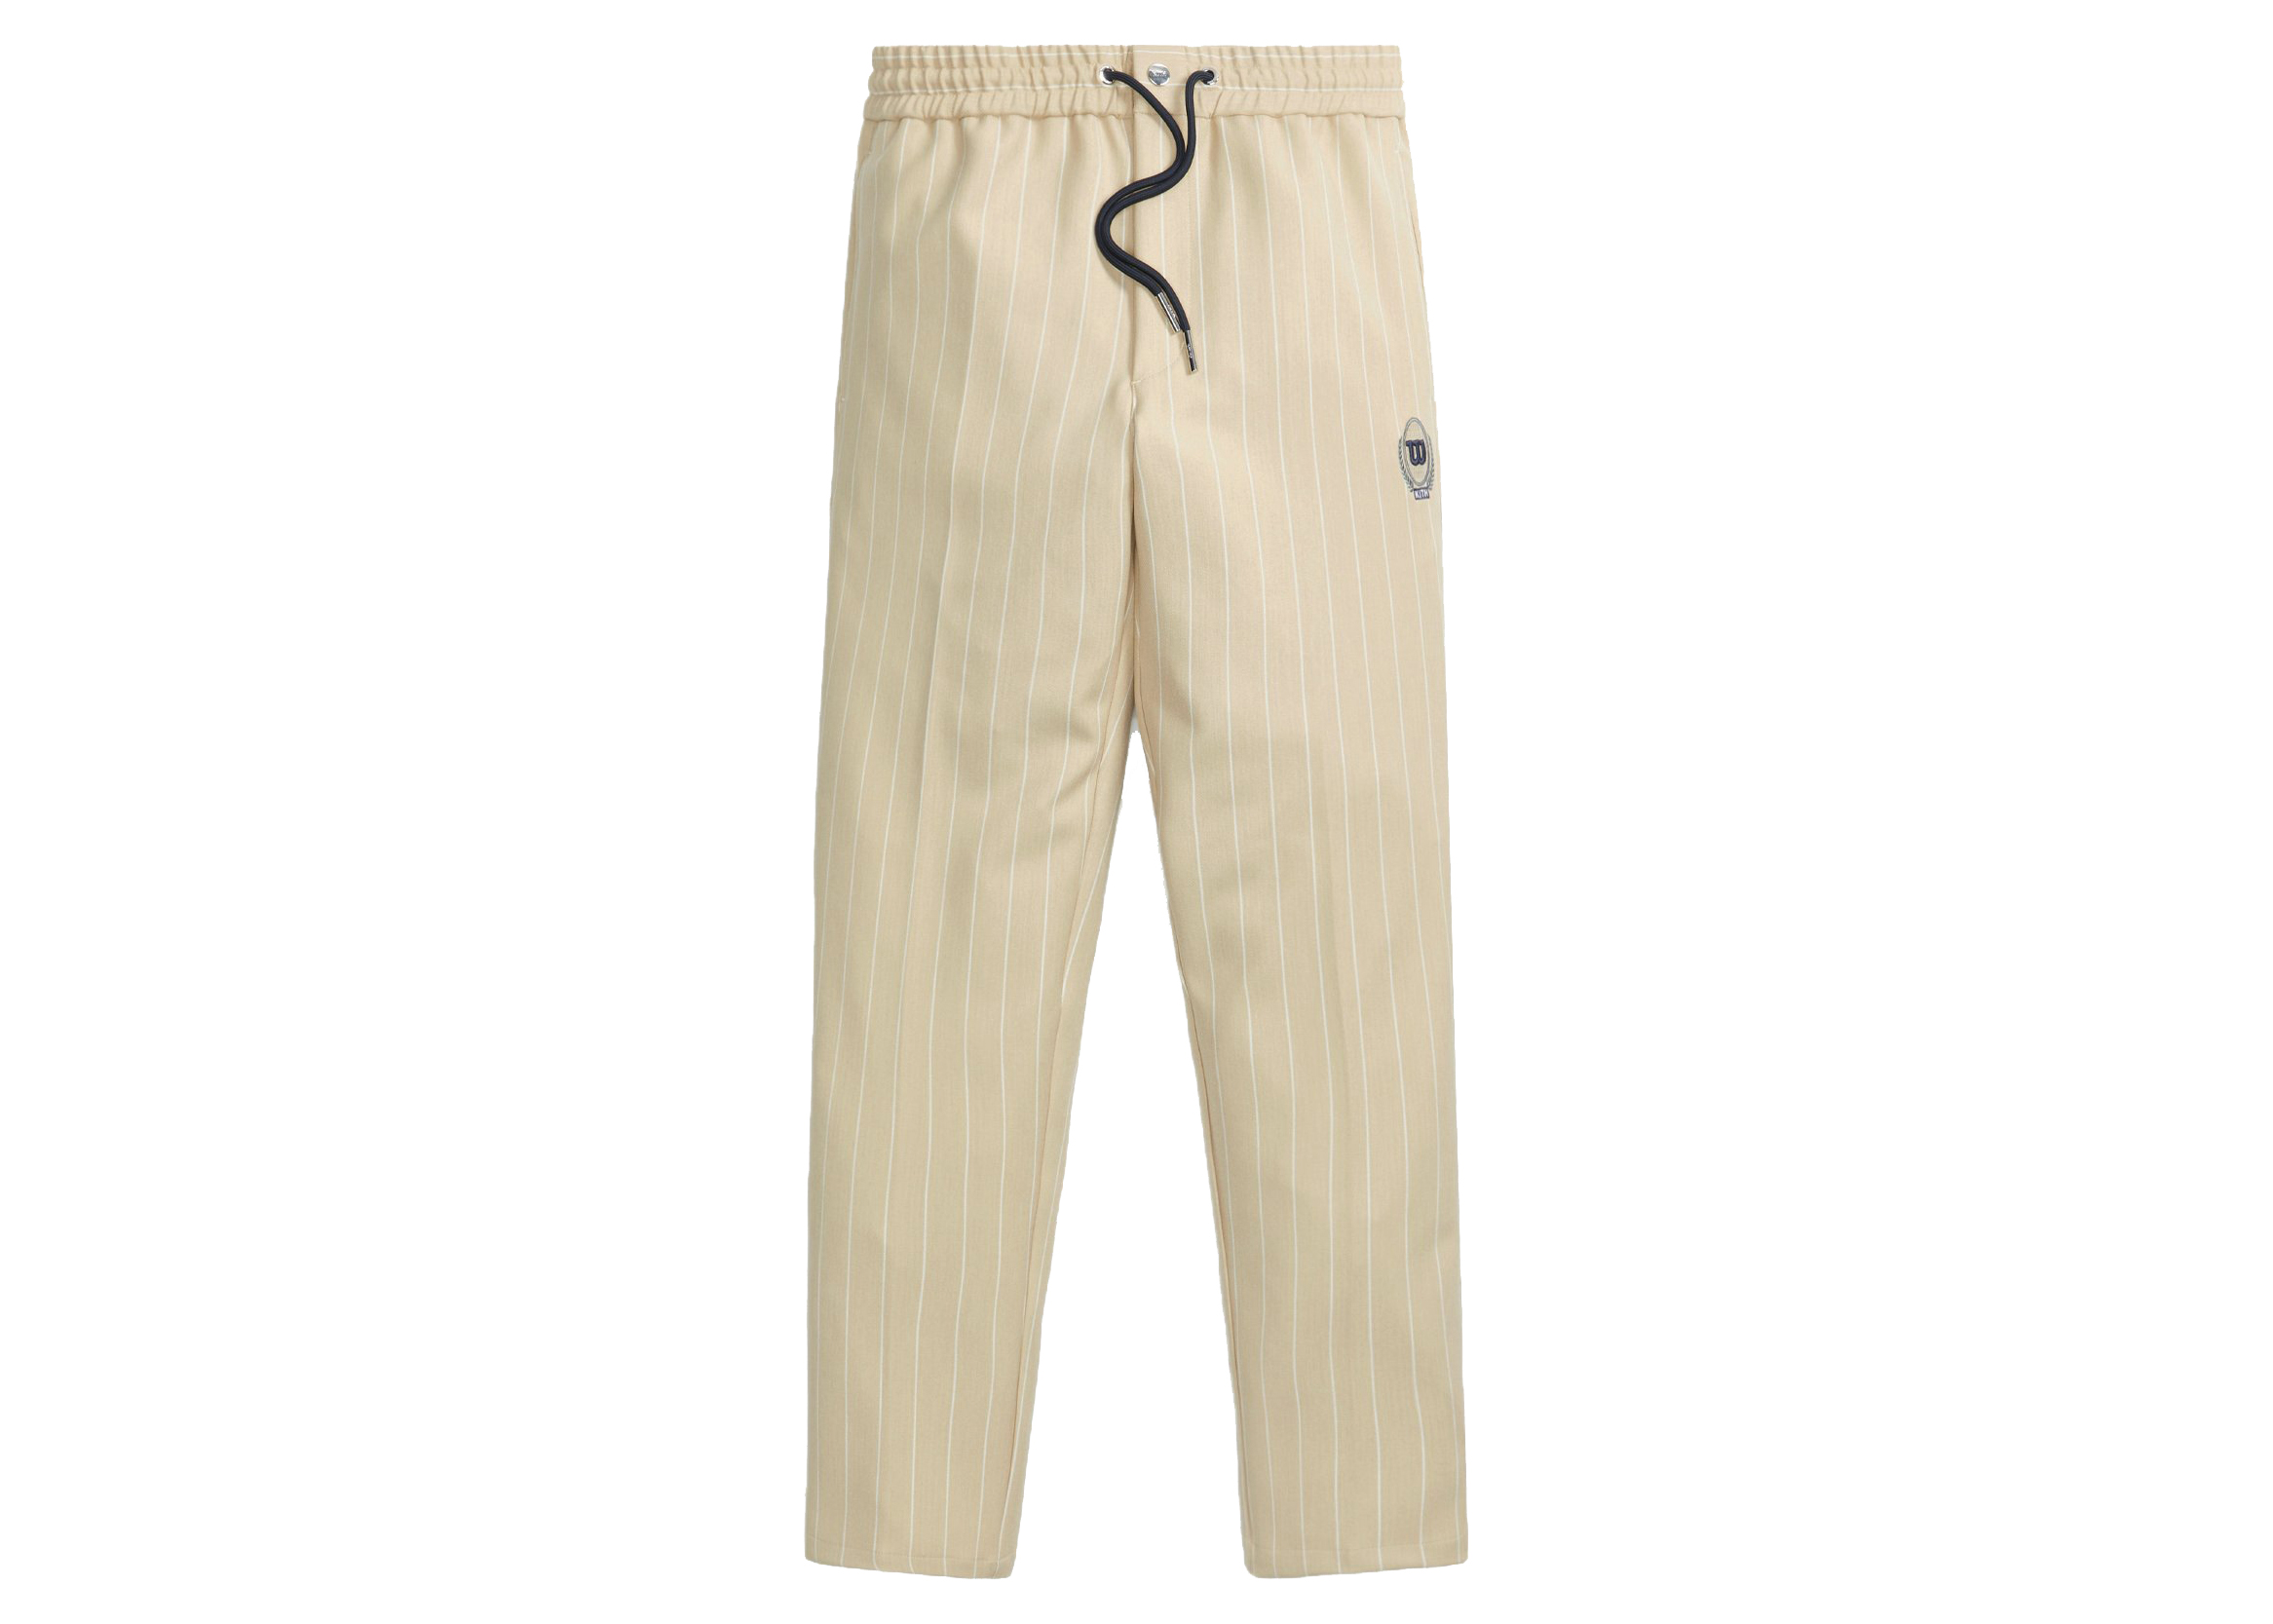 Kith x Wilson Pinstripe Double Knit Chatham Pant Canvas